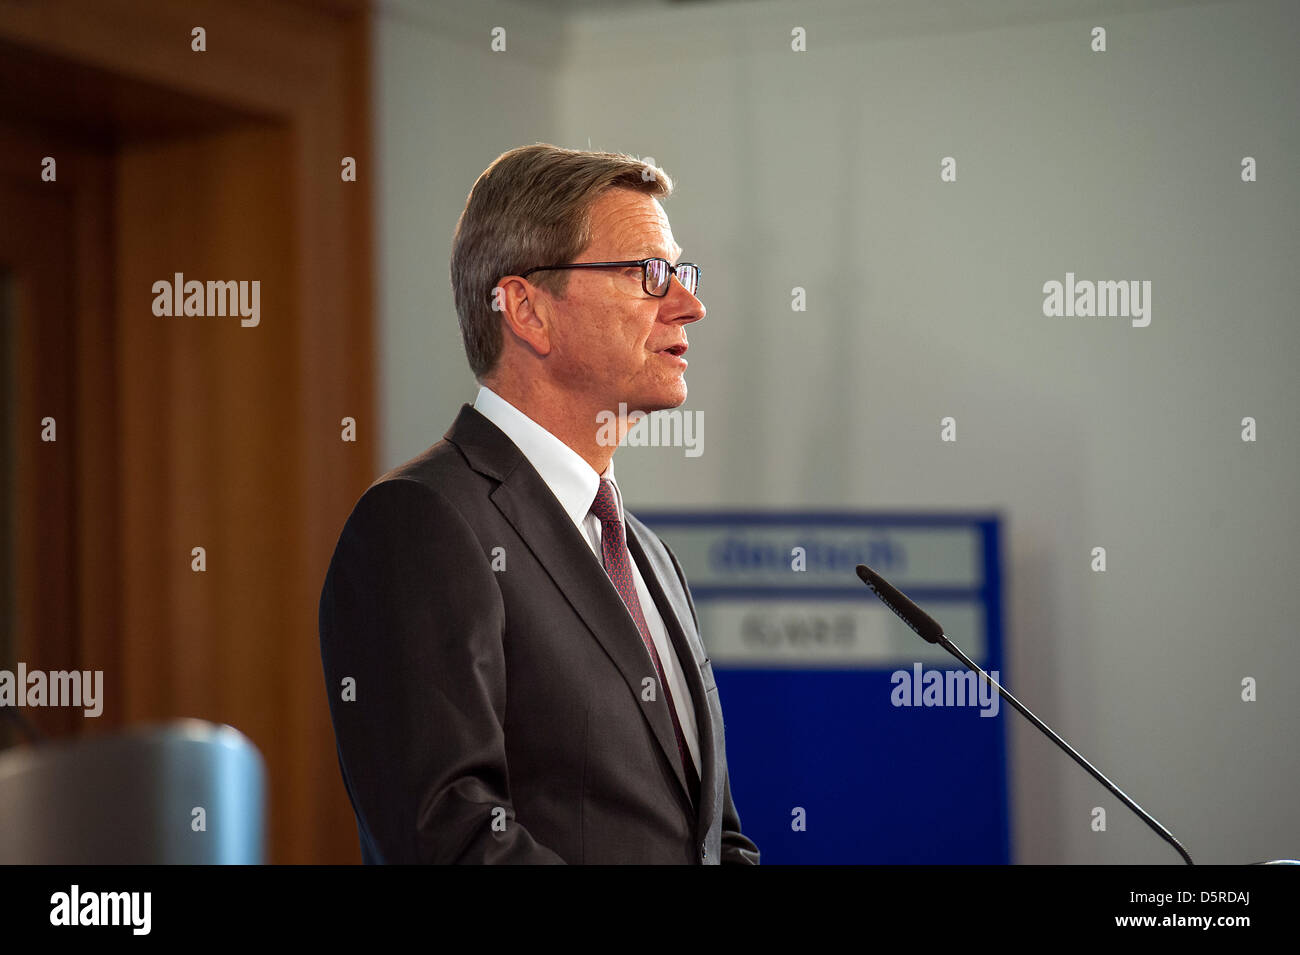 Berlin, Germany. 8th April 2013. German Foreign Minister, Guido Westerwelle receives Foreign Minister of Uruguay, Dr. Luis Leonardo Almagro, at the Foreign Office in Berlin for bilateral talks.Credit Credit: Gonçalo Silva/Alamy Live News. Stock Photo